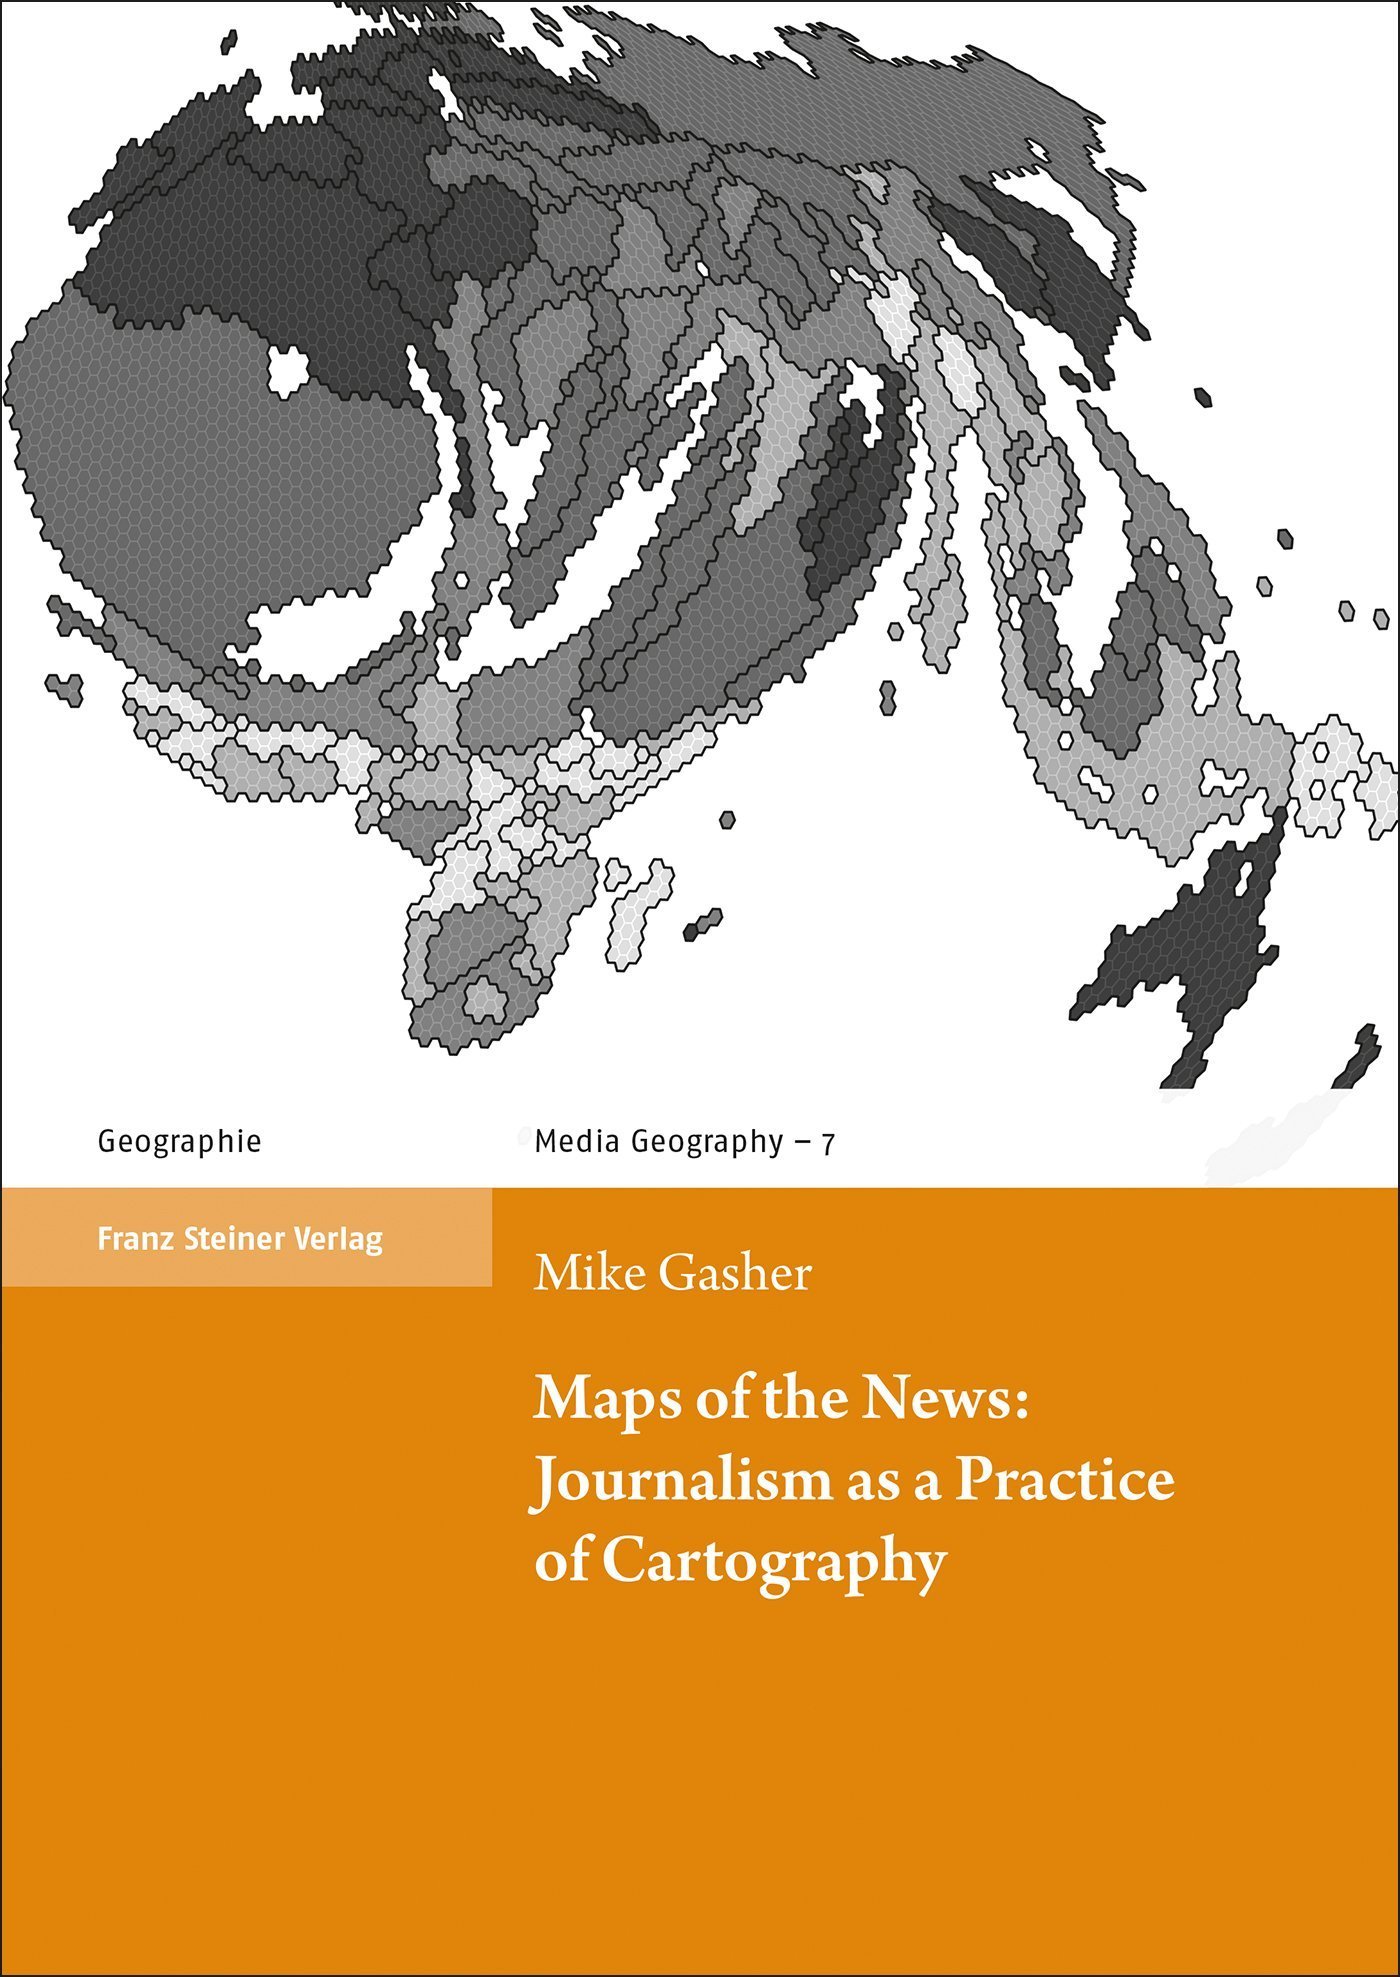 Maps of the News:Journalism as a Practice of Cartography